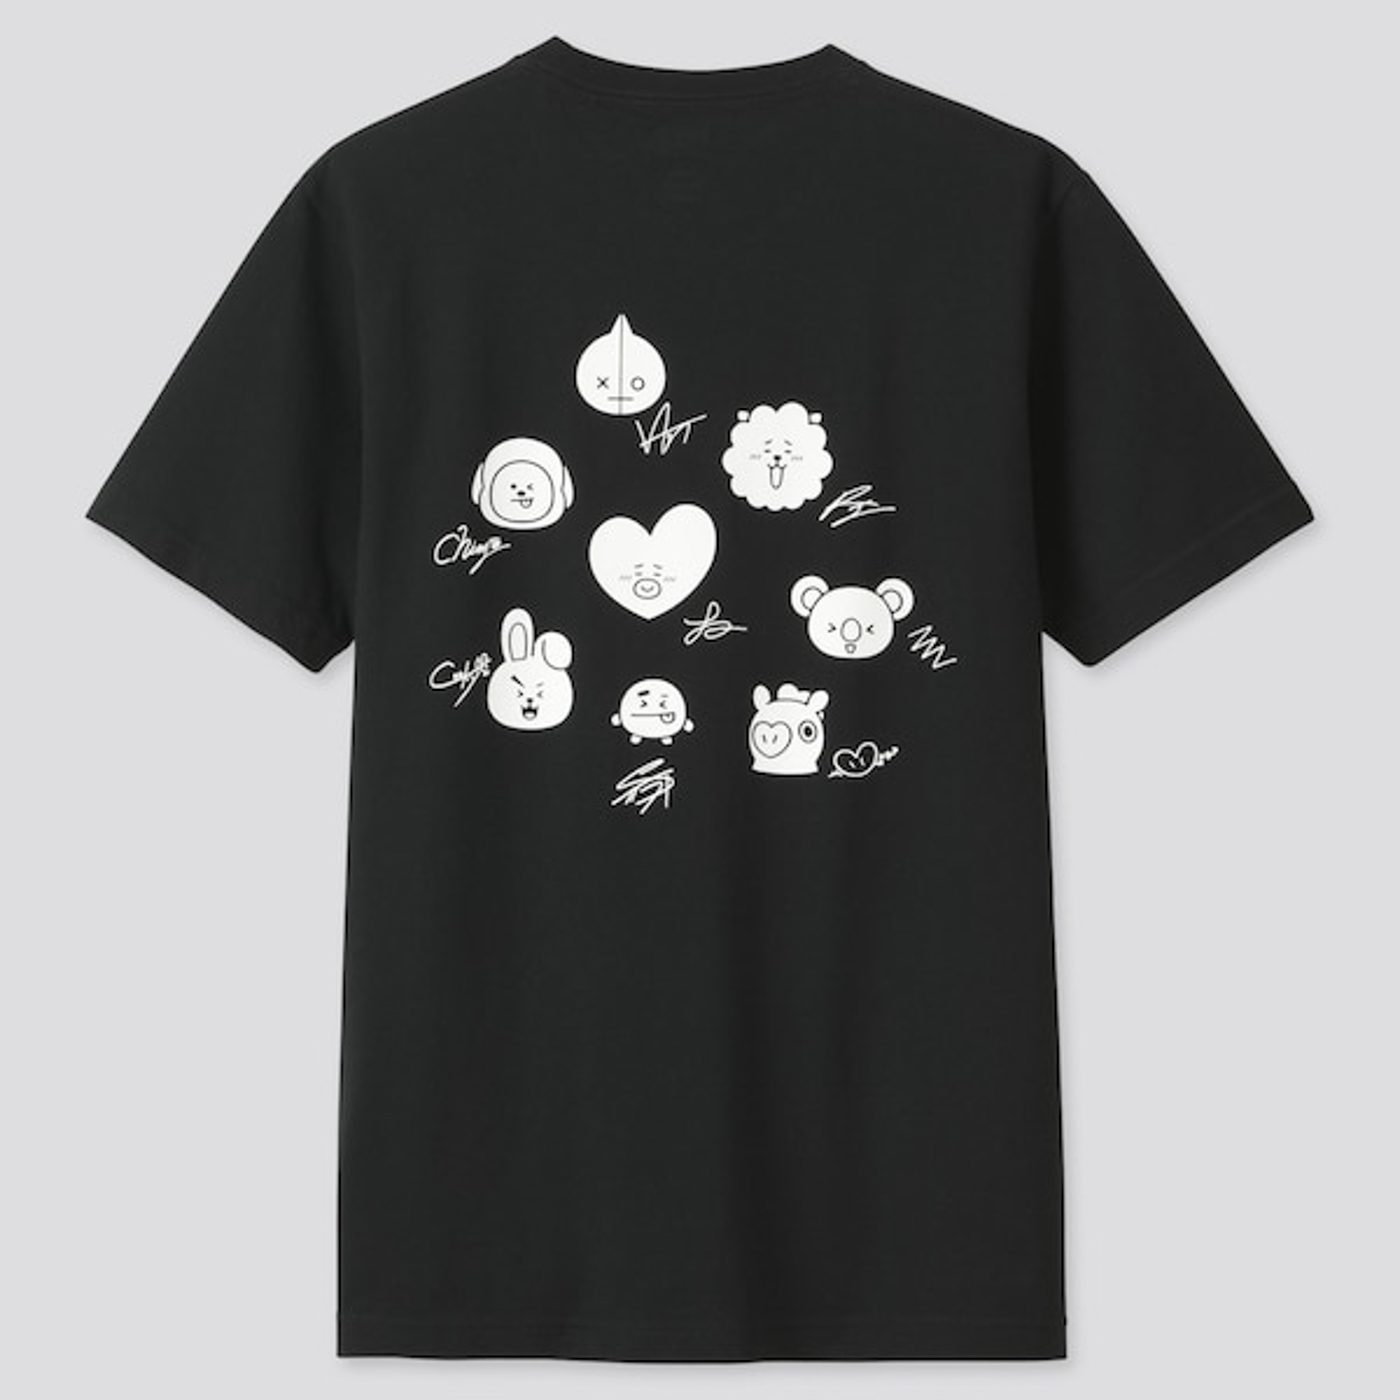 LOOK: Uniqlo's BT21 shirts are every BTS Army's dream tee come true